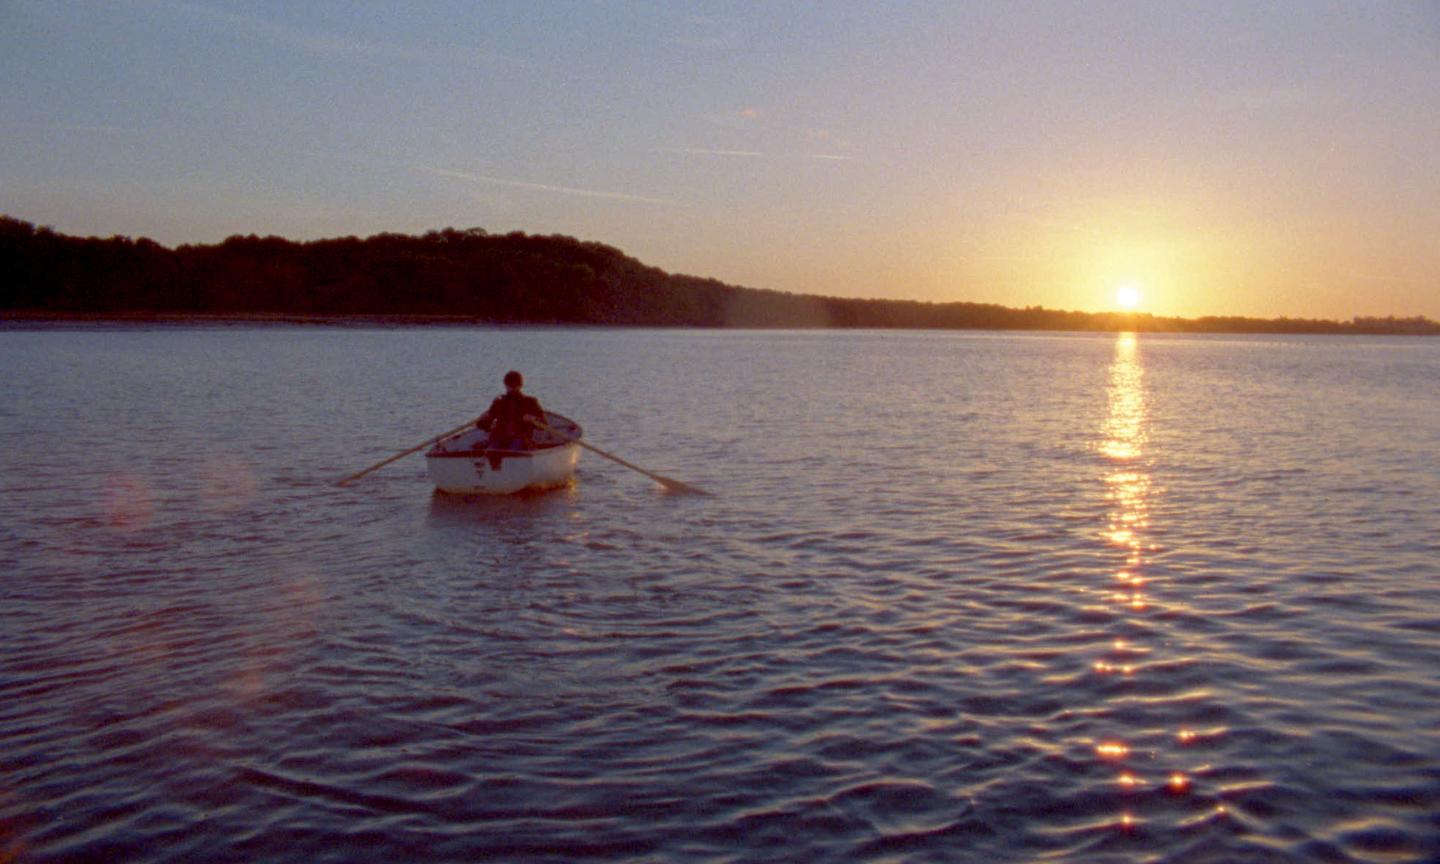 A man in a small rowing boat on calm water, with trees and a sunset in the background.